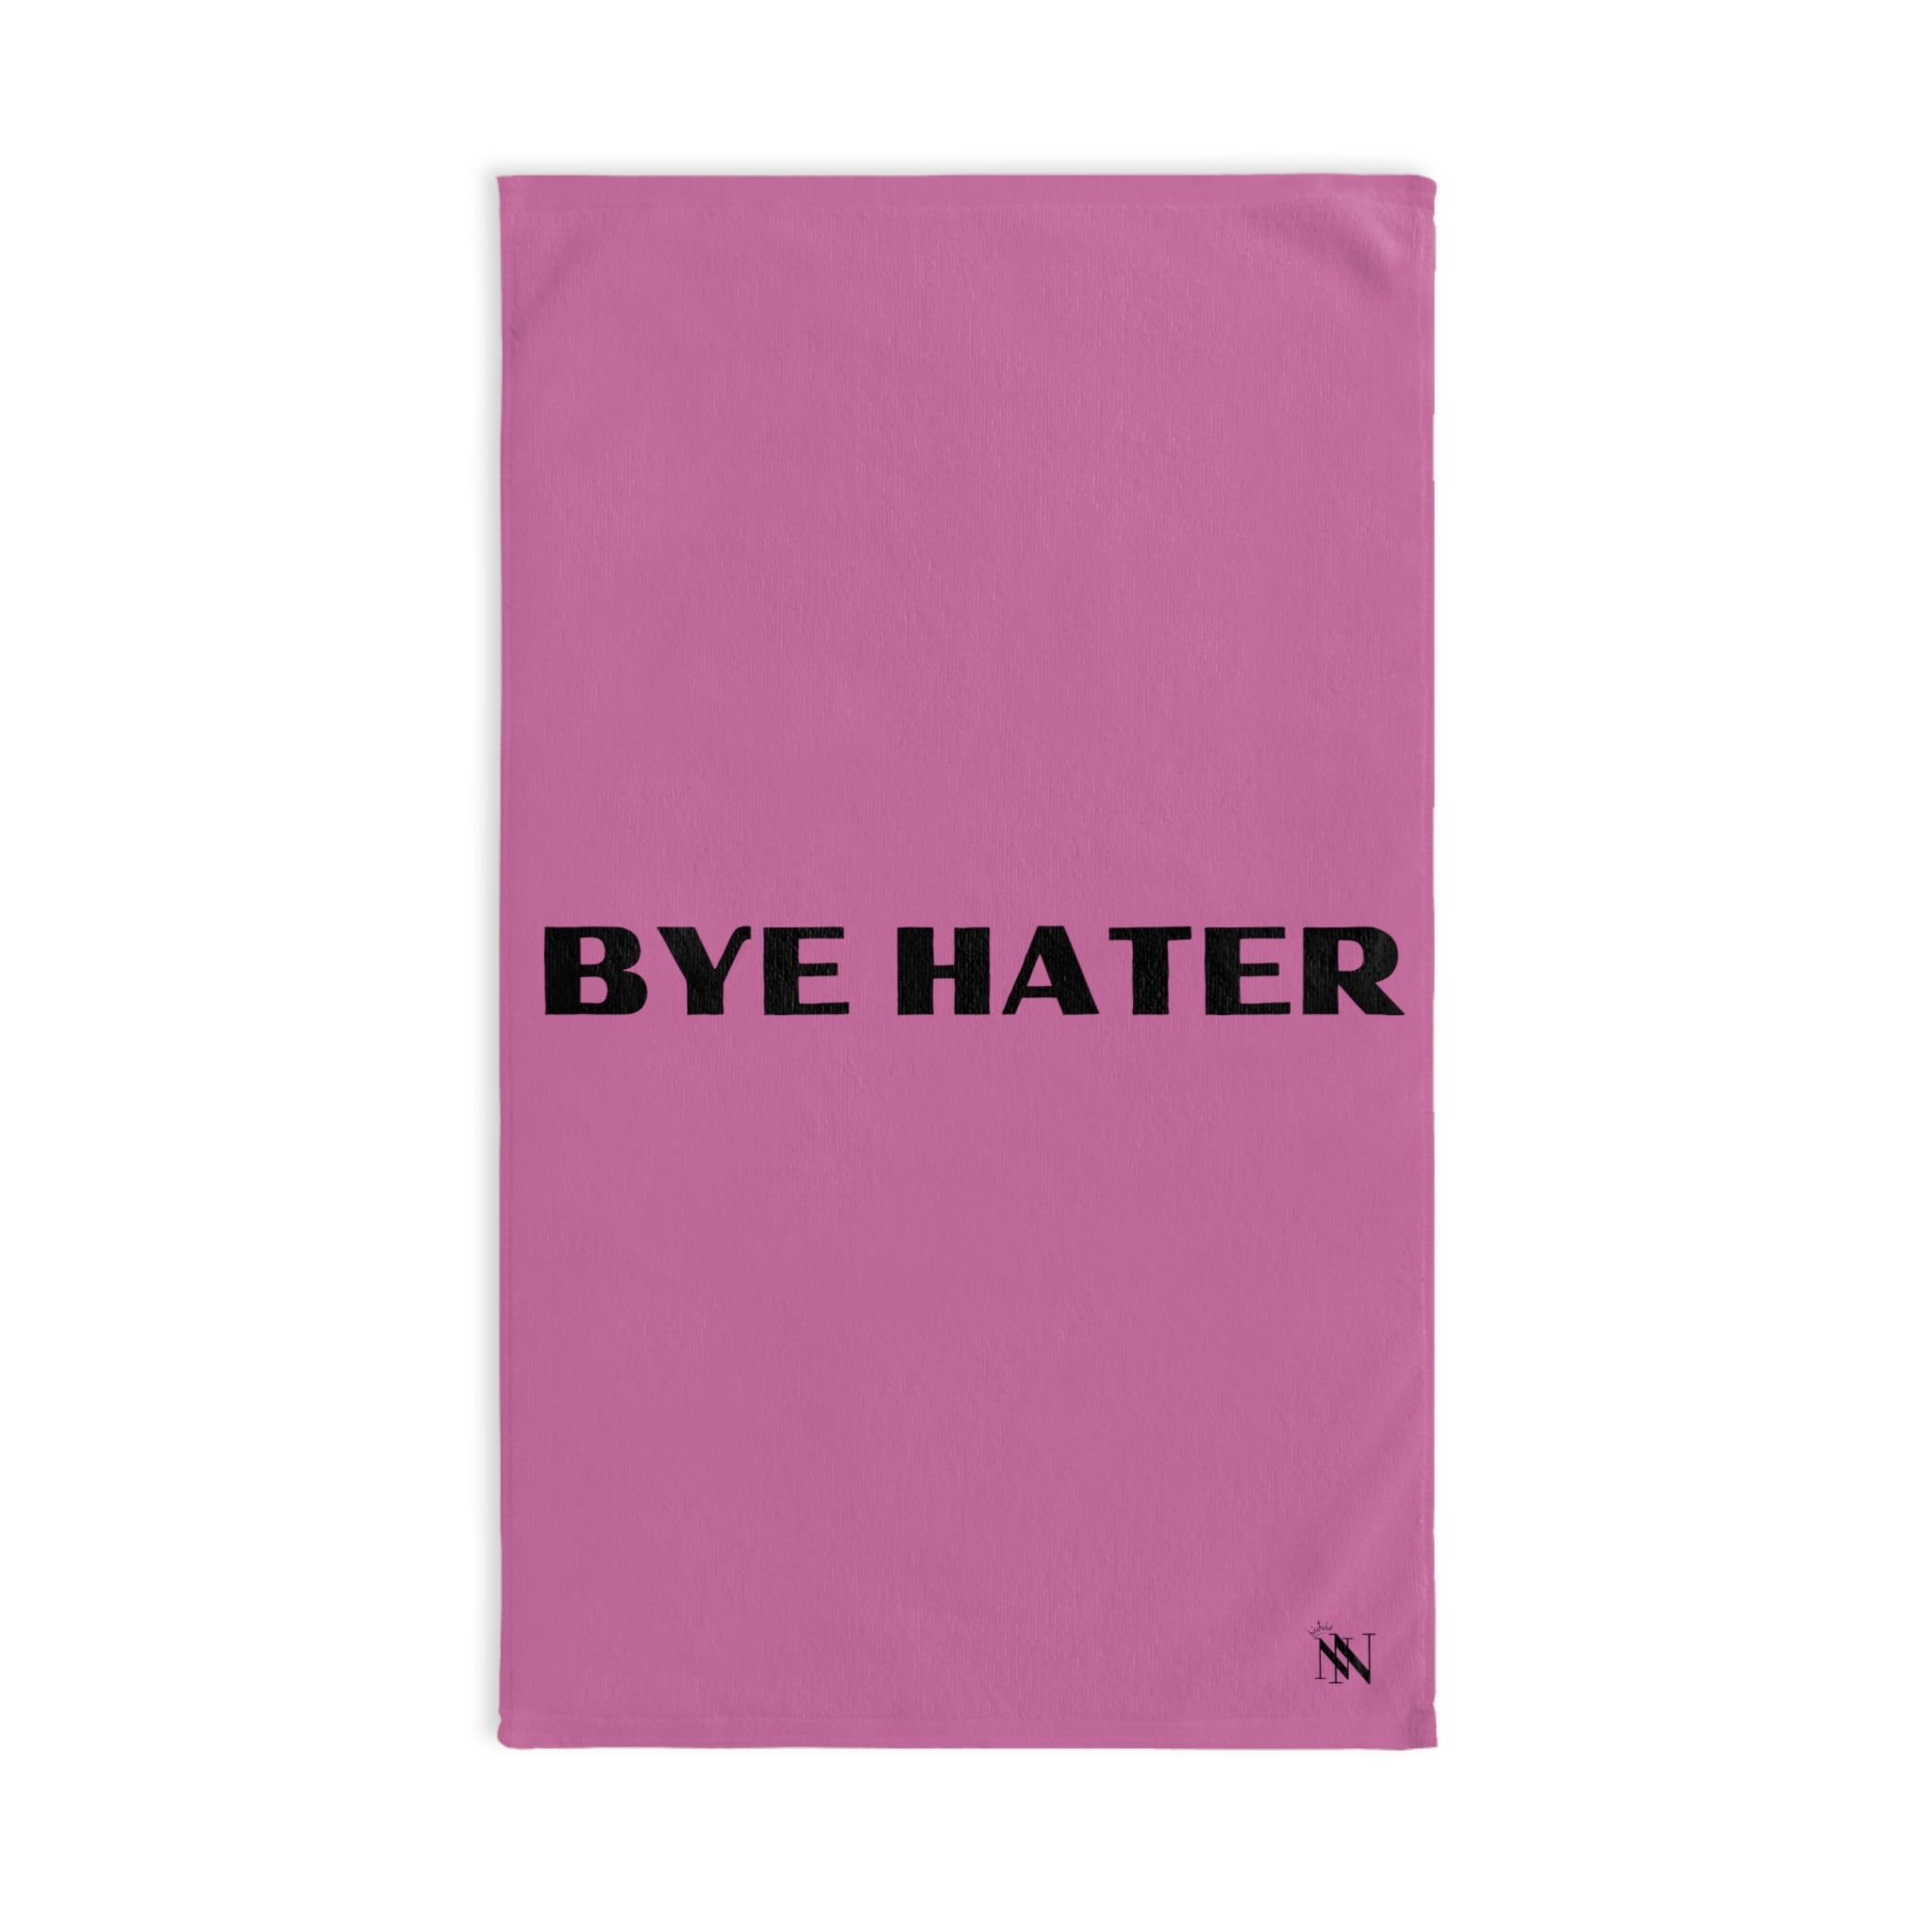 BYE Hater Fun Pink | Novelty Gifts for Boyfriend, Funny Towel Romantic Gift for Wedding Couple Fiance First Year Anniversary Valentines, Party Gag Gifts, Joke Humor Cloth for Husband Men BF NECTAR NAPKINS